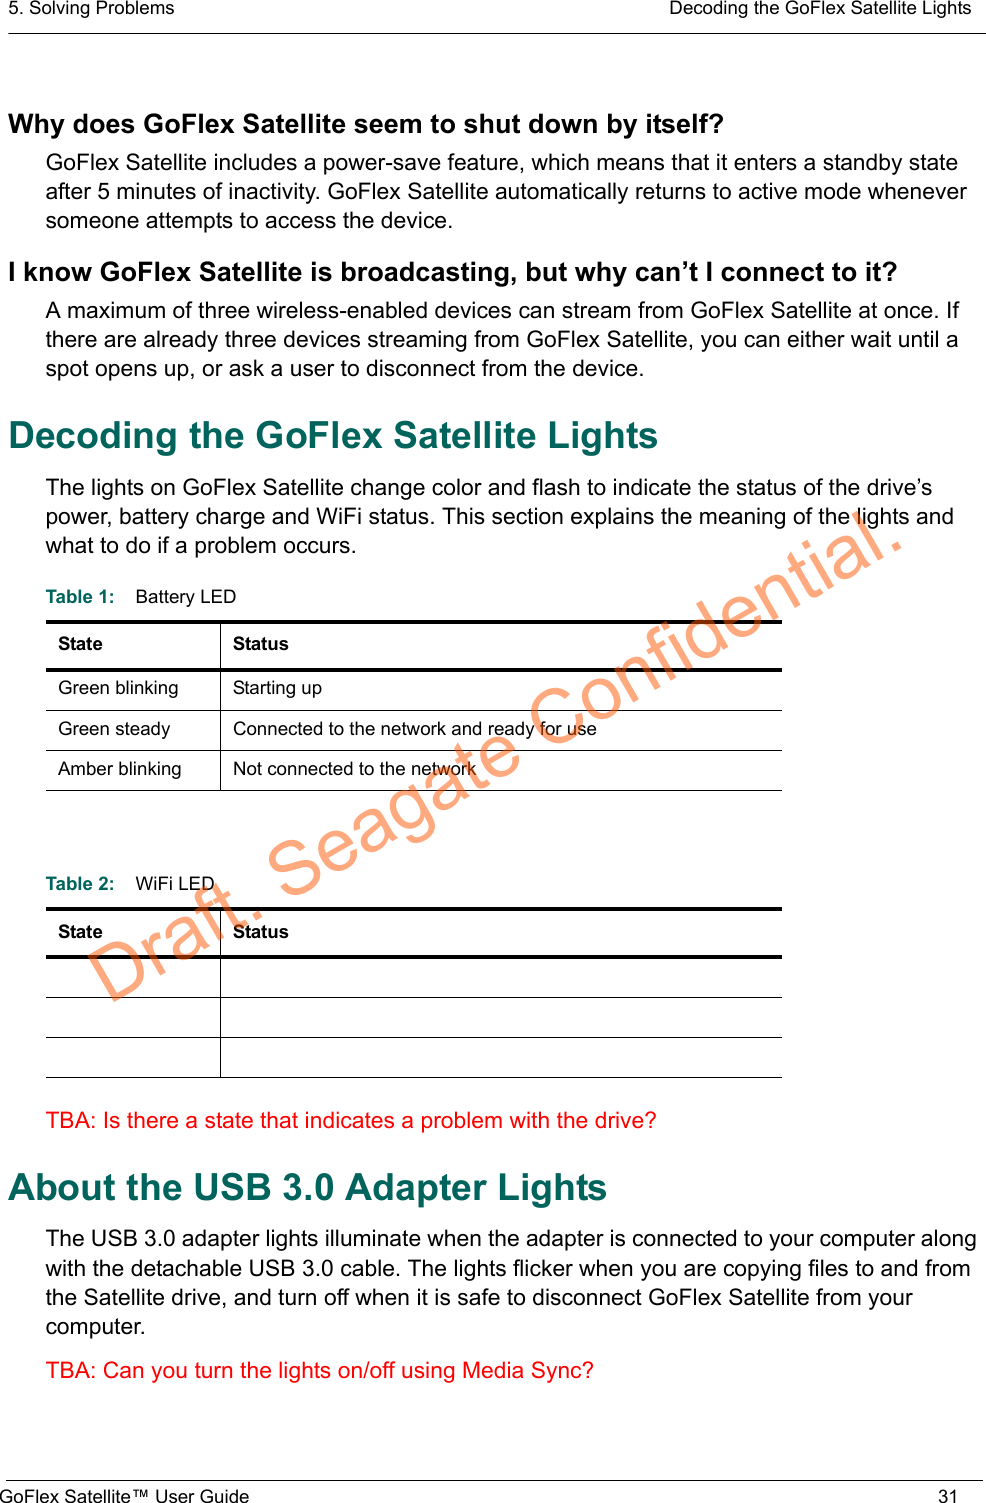 5. Solving Problems  Decoding the GoFlex Satellite LightsGoFlex Satellite™ User Guide 31Why does GoFlex Satellite seem to shut down by itself?GoFlex Satellite includes a power-save feature, which means that it enters a standby state after 5 minutes of inactivity. GoFlex Satellite automatically returns to active mode whenever someone attempts to access the device.I know GoFlex Satellite is broadcasting, but why can’t I connect to it?A maximum of three wireless-enabled devices can stream from GoFlex Satellite at once. If there are already three devices streaming from GoFlex Satellite, you can either wait until a spot opens up, or ask a user to disconnect from the device.Decoding the GoFlex Satellite LightsThe lights on GoFlex Satellite change color and flash to indicate the status of the drive’s power, battery charge and WiFi status. This section explains the meaning of the lights and what to do if a problem occurs.TBA: Is there a state that indicates a problem with the drive?About the USB 3.0 Adapter LightsThe USB 3.0 adapter lights illuminate when the adapter is connected to your computer along with the detachable USB 3.0 cable. The lights flicker when you are copying files to and from the Satellite drive, and turn off when it is safe to disconnect GoFlex Satellite from your computer.TBA: Can you turn the lights on/off using Media Sync?Table 1:    Battery LEDState StatusGreen blinking Starting upGreen steady Connected to the network and ready for useAmber blinking Not connected to the networkTable 2:    WiFi LEDState StatusDraft. Seagate Confidential.